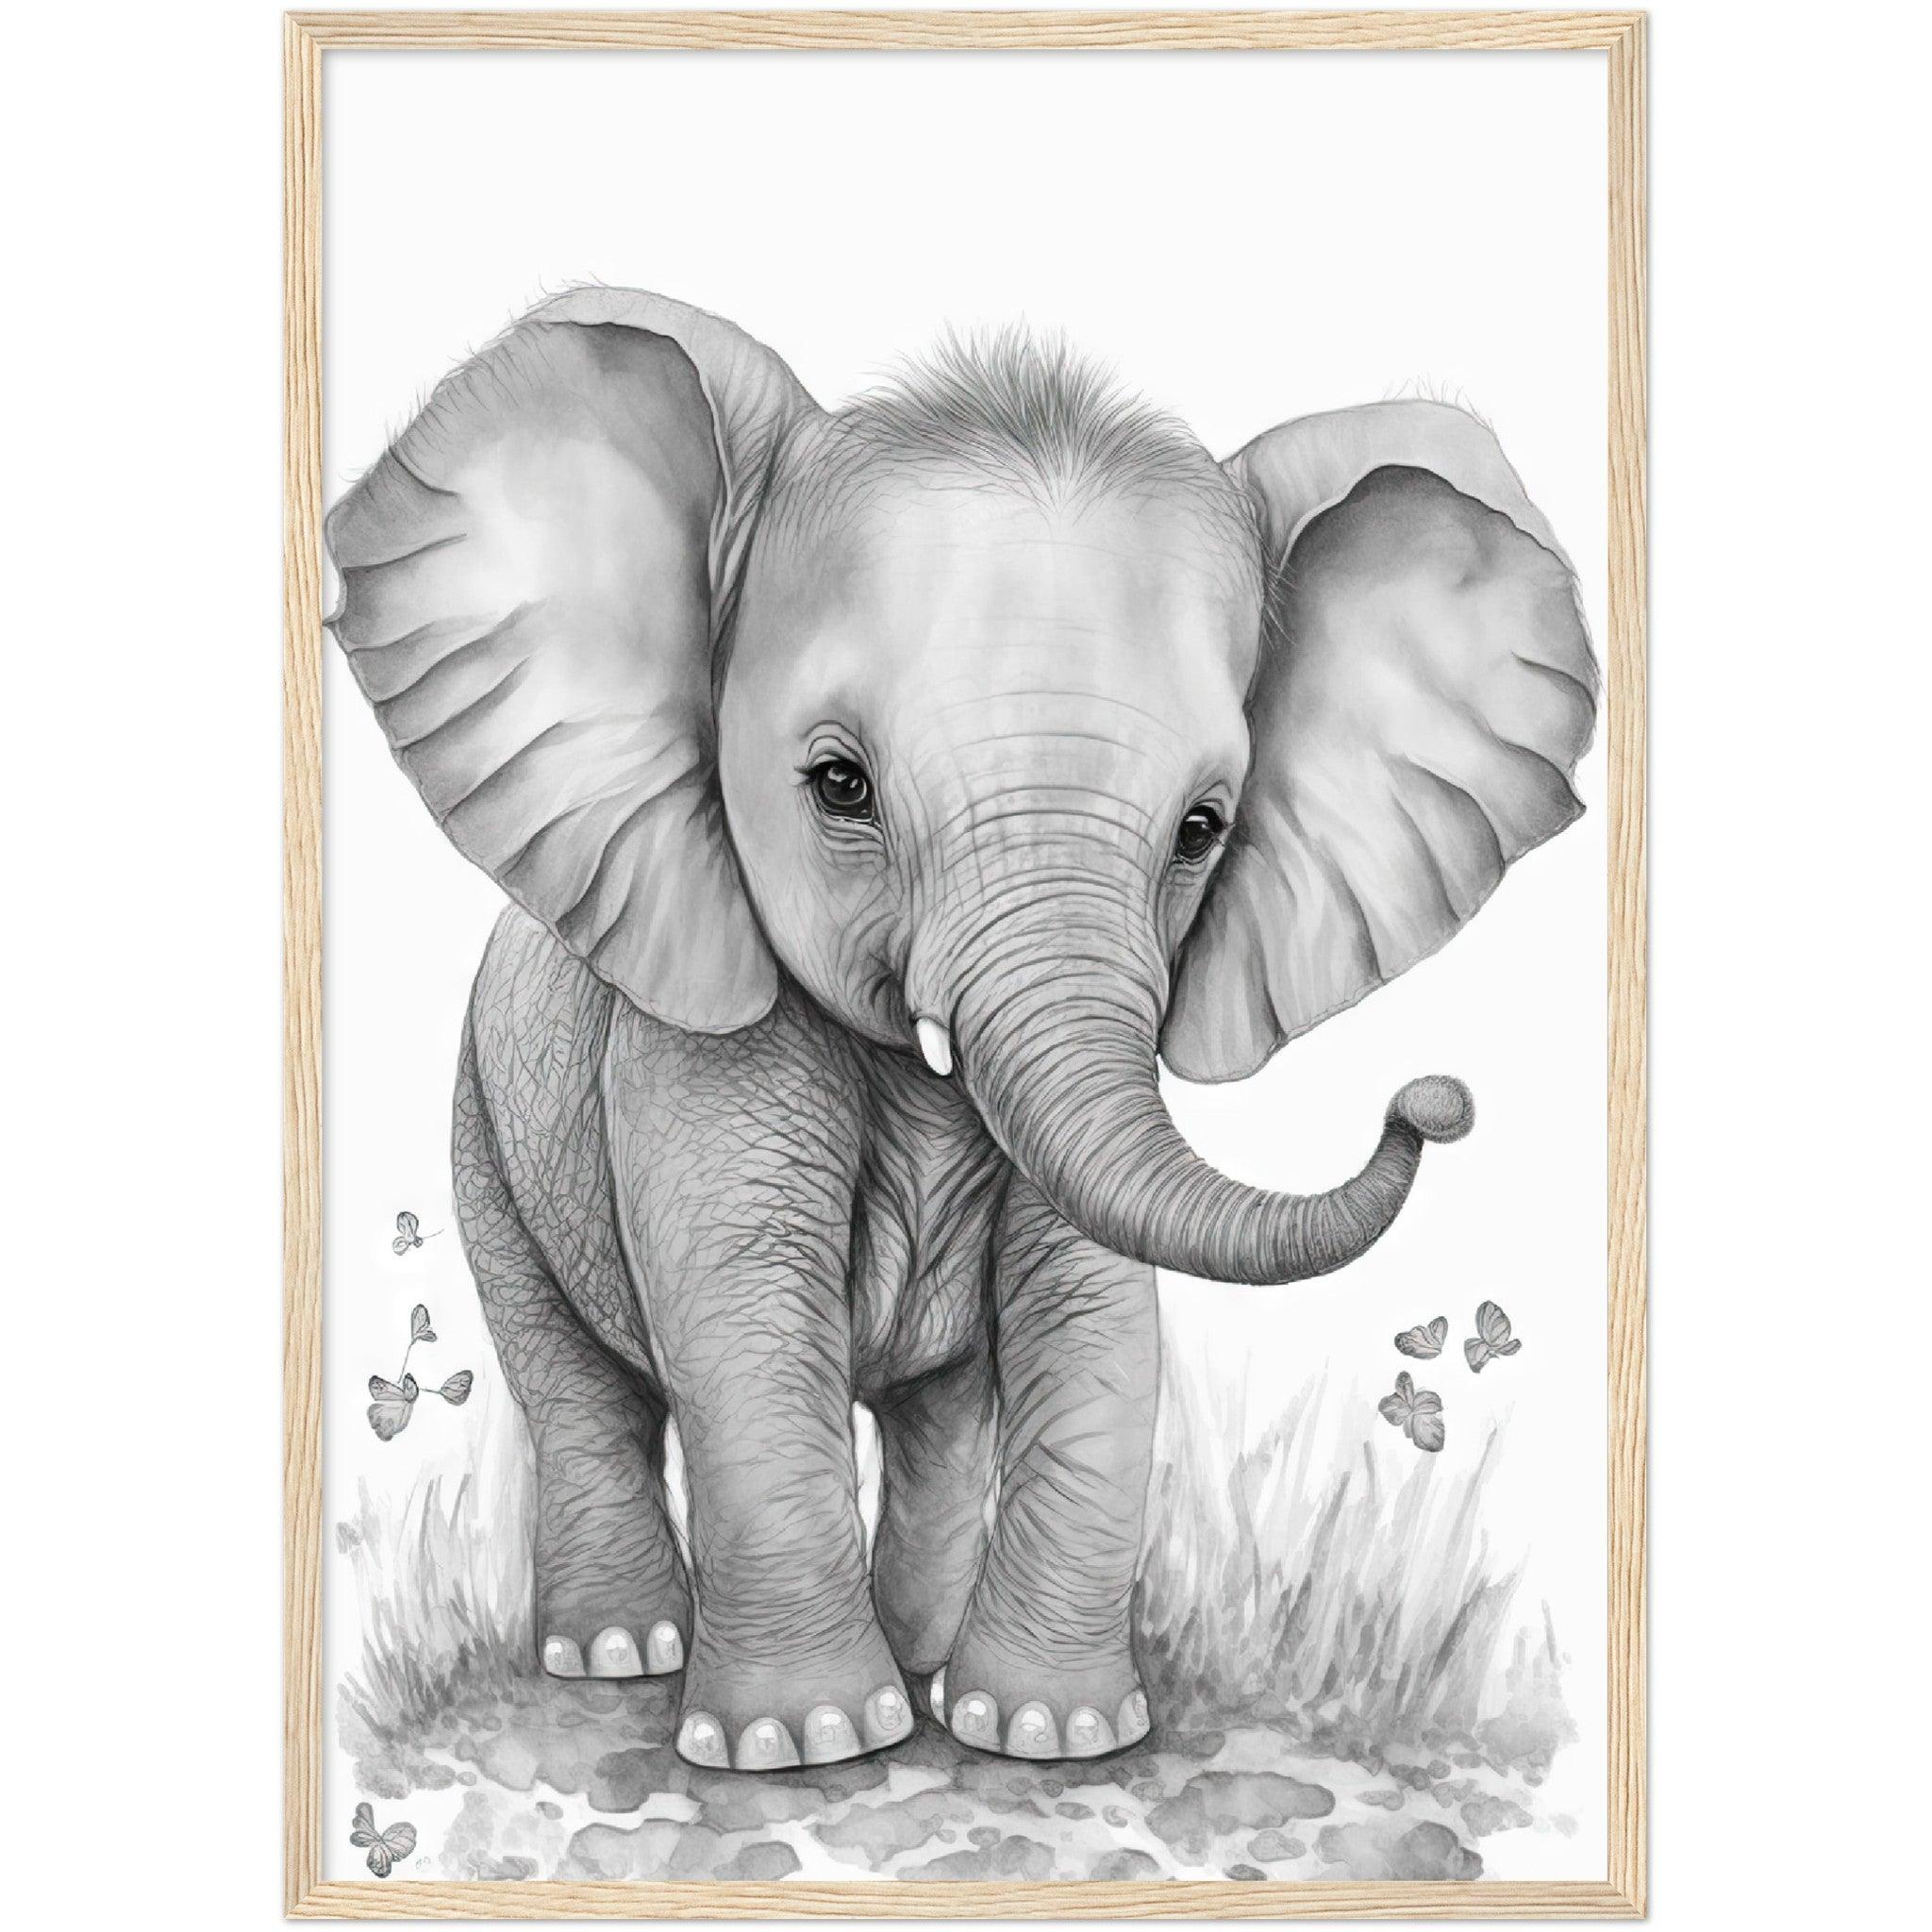 How to Draw a Cute Baby Elephant with Flower Easy Steps - YouTube